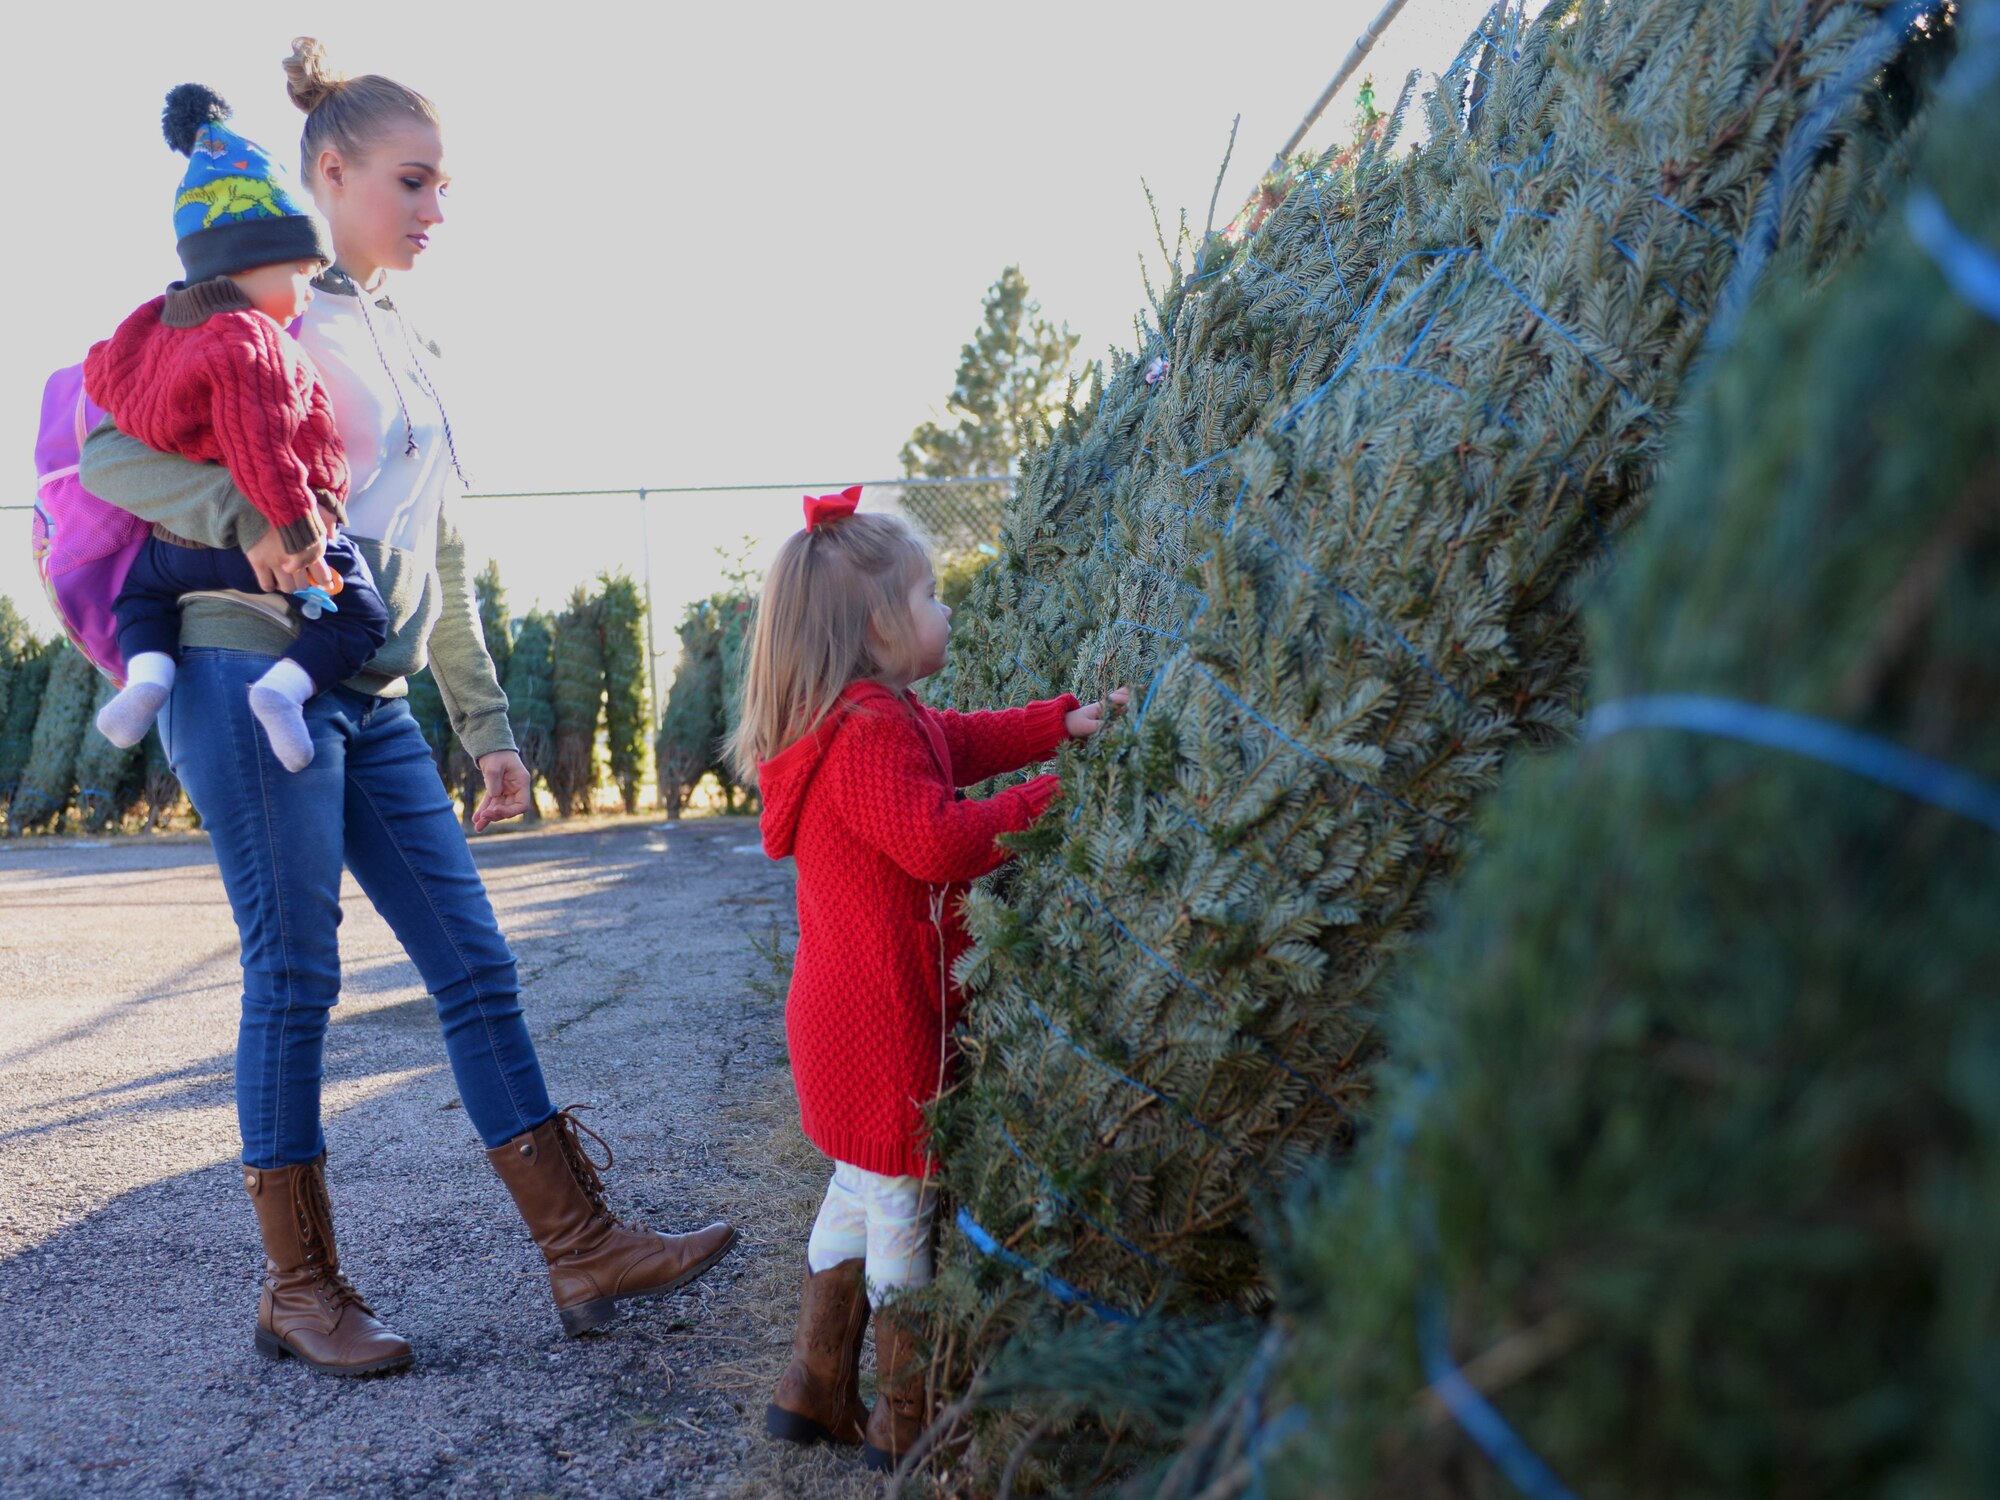 Tashina Thompson, spouse of Senior Airman Jordan Thompson, who is currently serving overseas, watches as her daughter Allyanna picks a Christmas tree during Ellsworth’s ninth annual Trees for Troops event Dec. 2, 2016. This year was Thompson’s first time participating in the program, and says it was a wonderful feeling being able to have a Christmas tree. (U.S. Air Force photo by Airman 1st Class Denise M. Jenson)